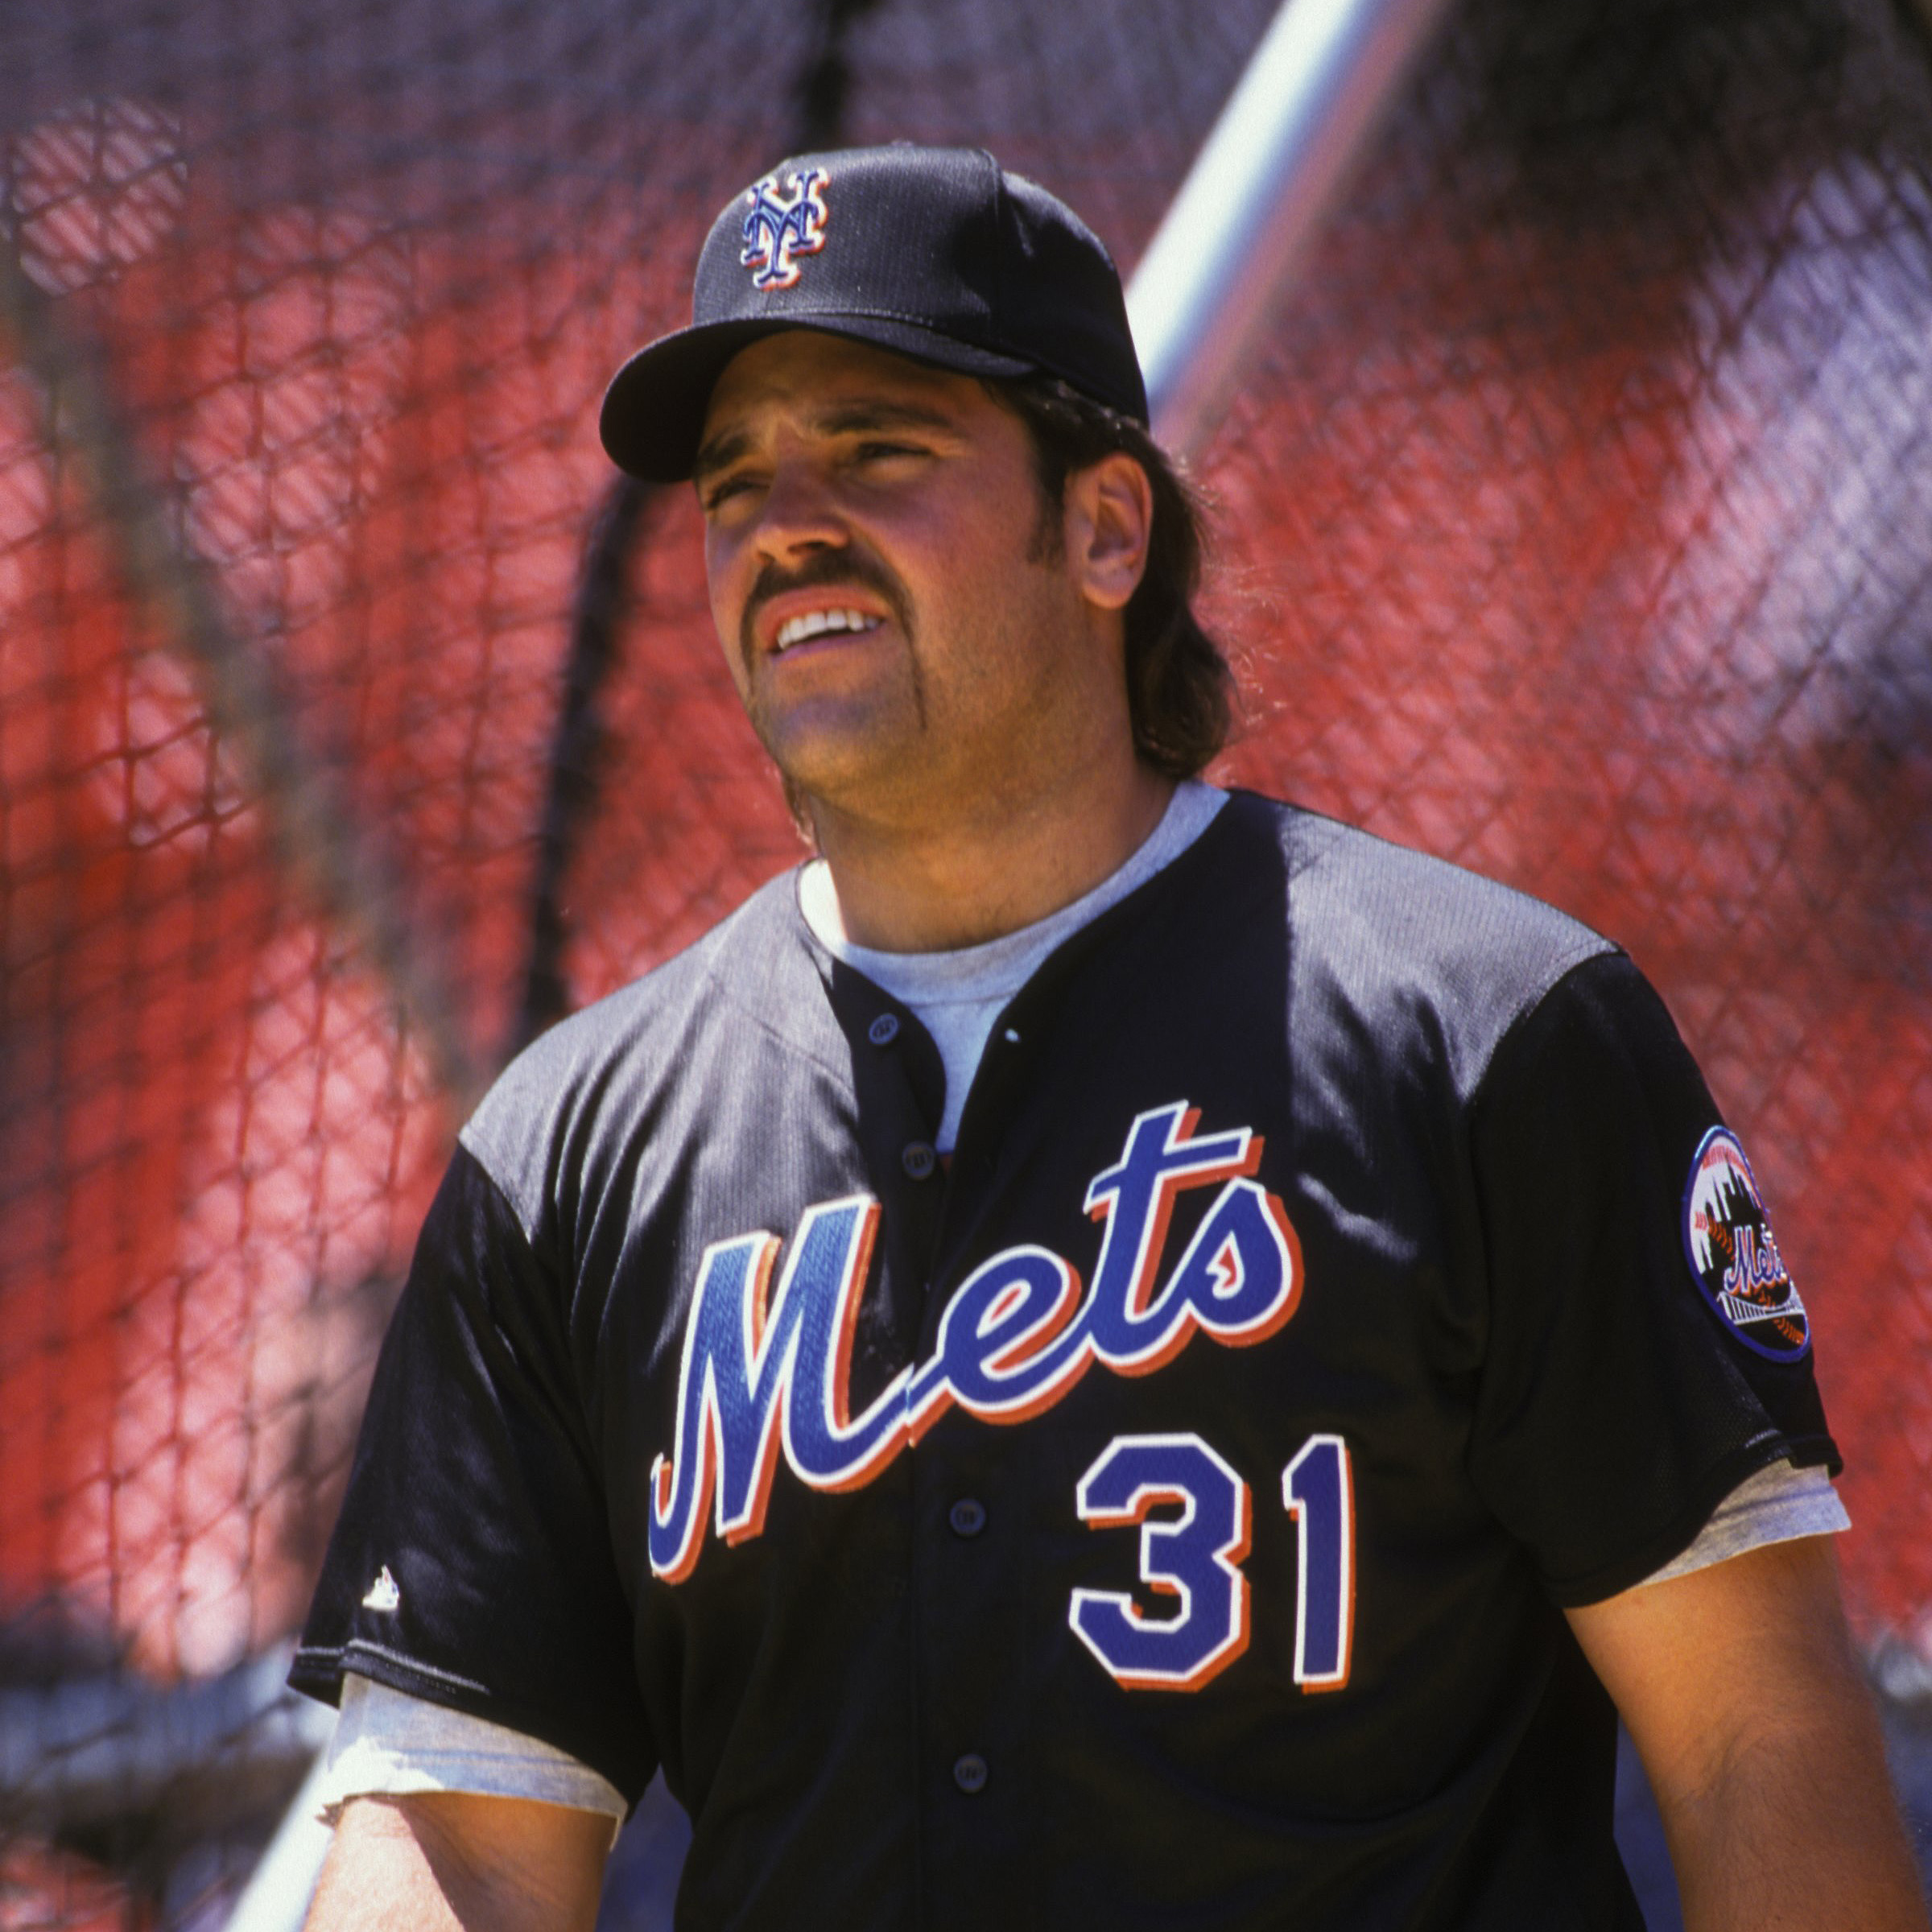 The New York Mets are reviving their black uniforms for the second